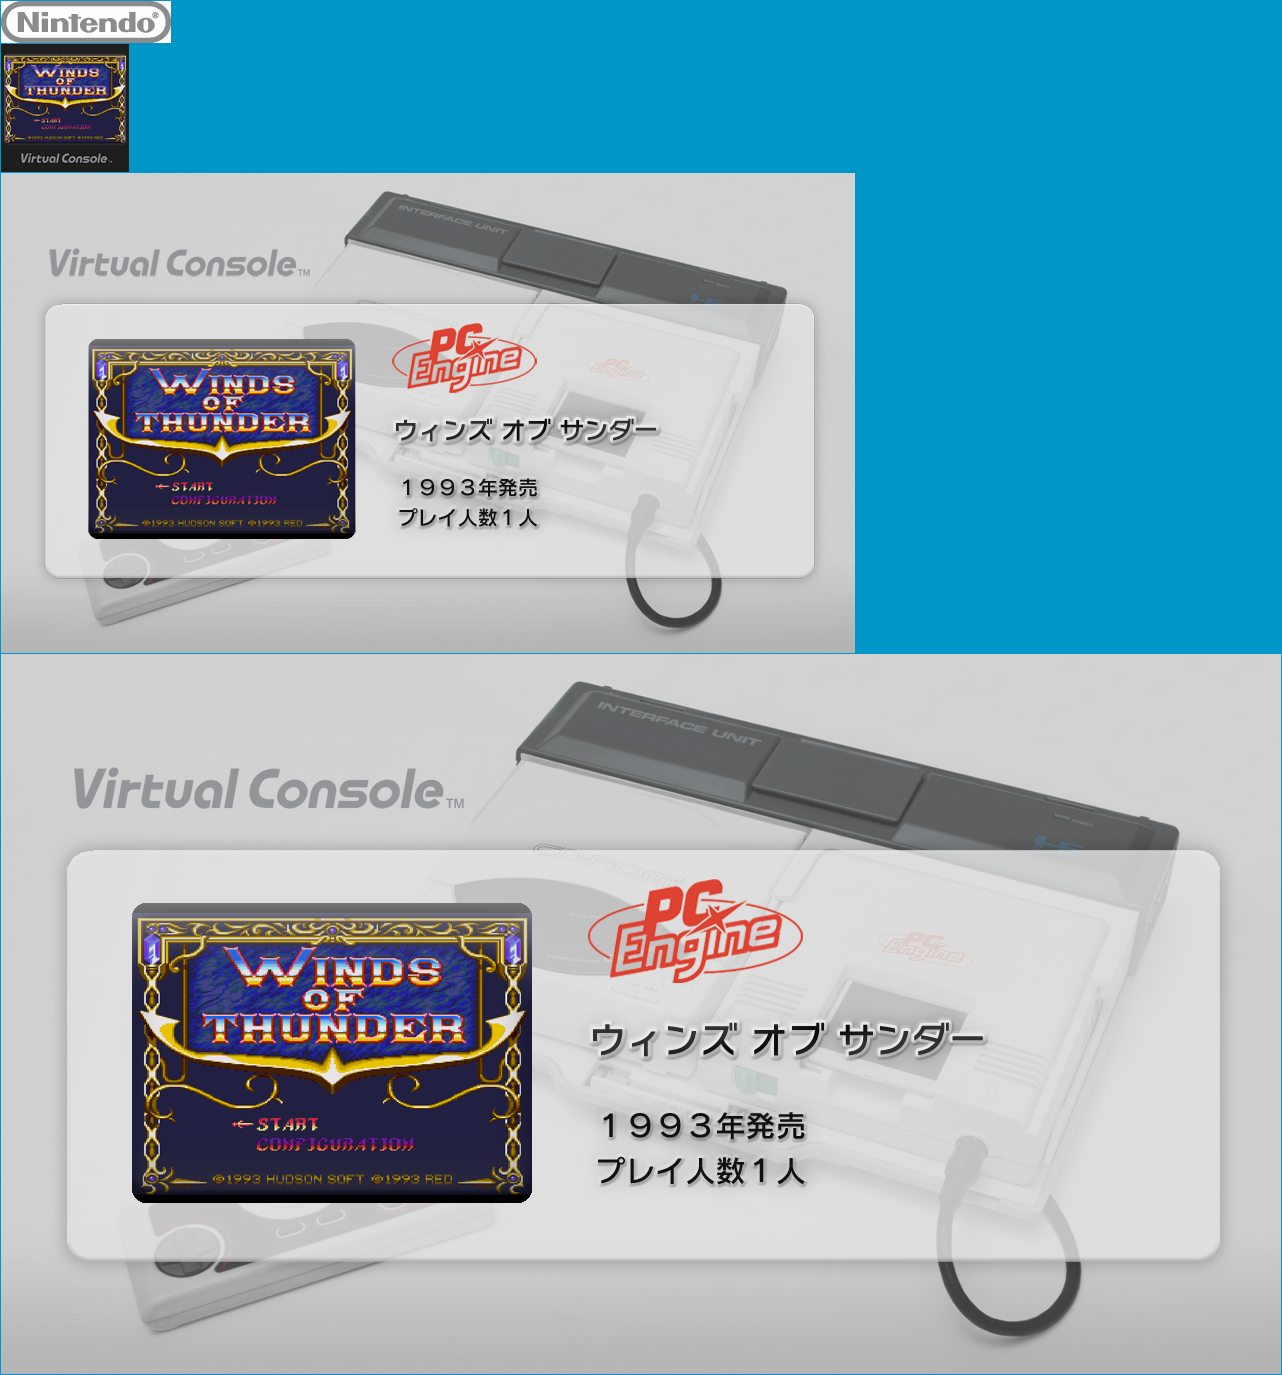 Virtual Console - Winds of Thunder